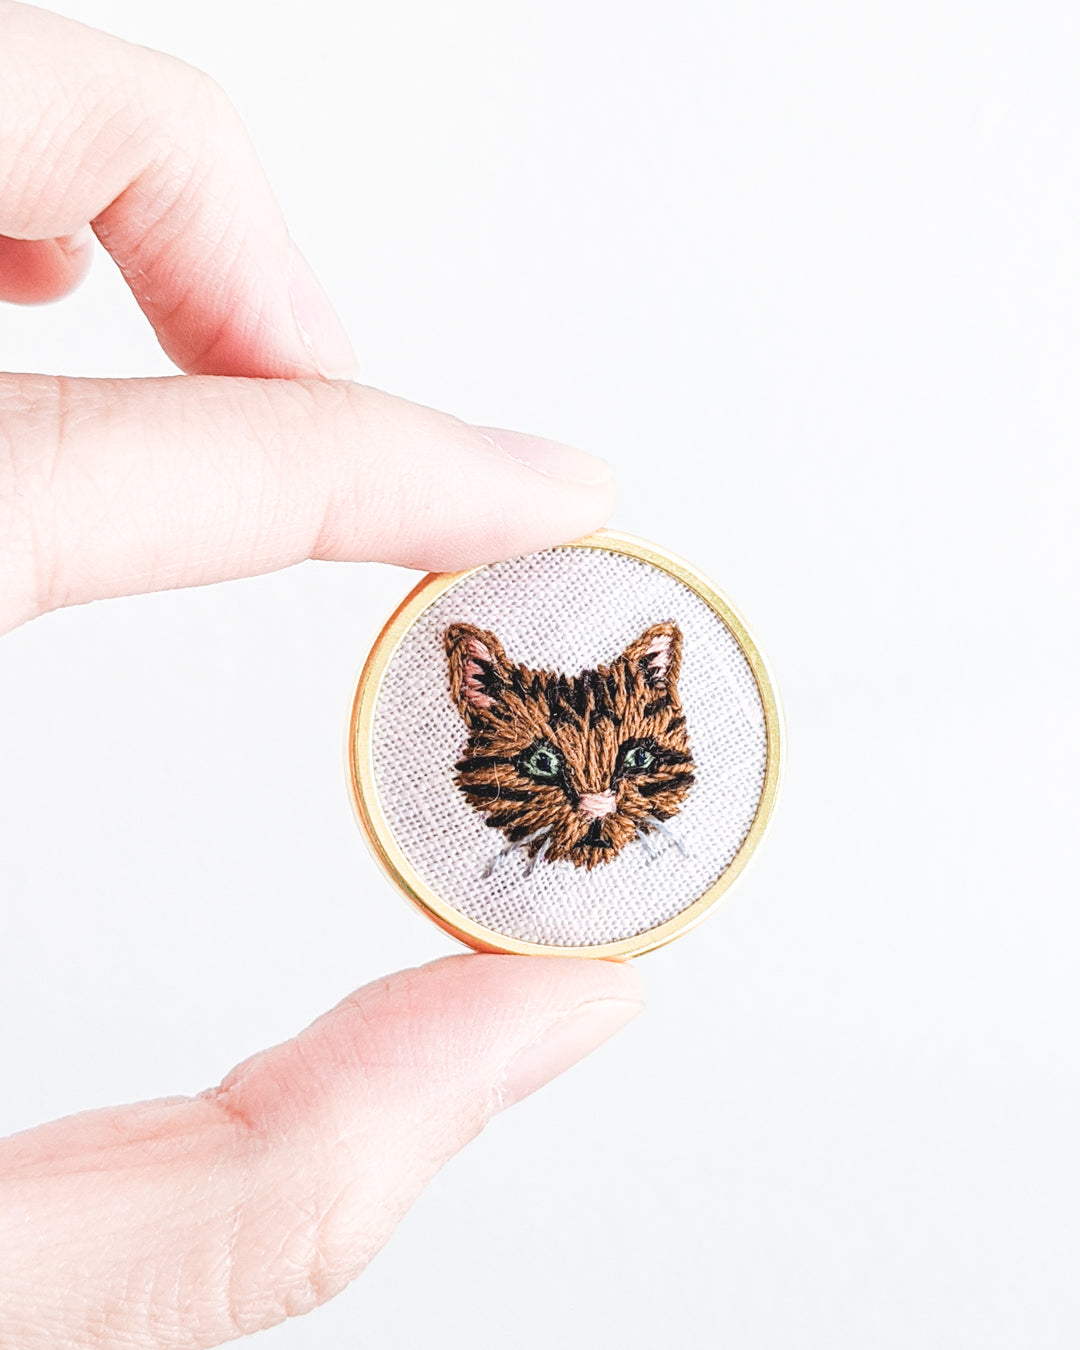 Embroidered Cat Pin - Brown tabby